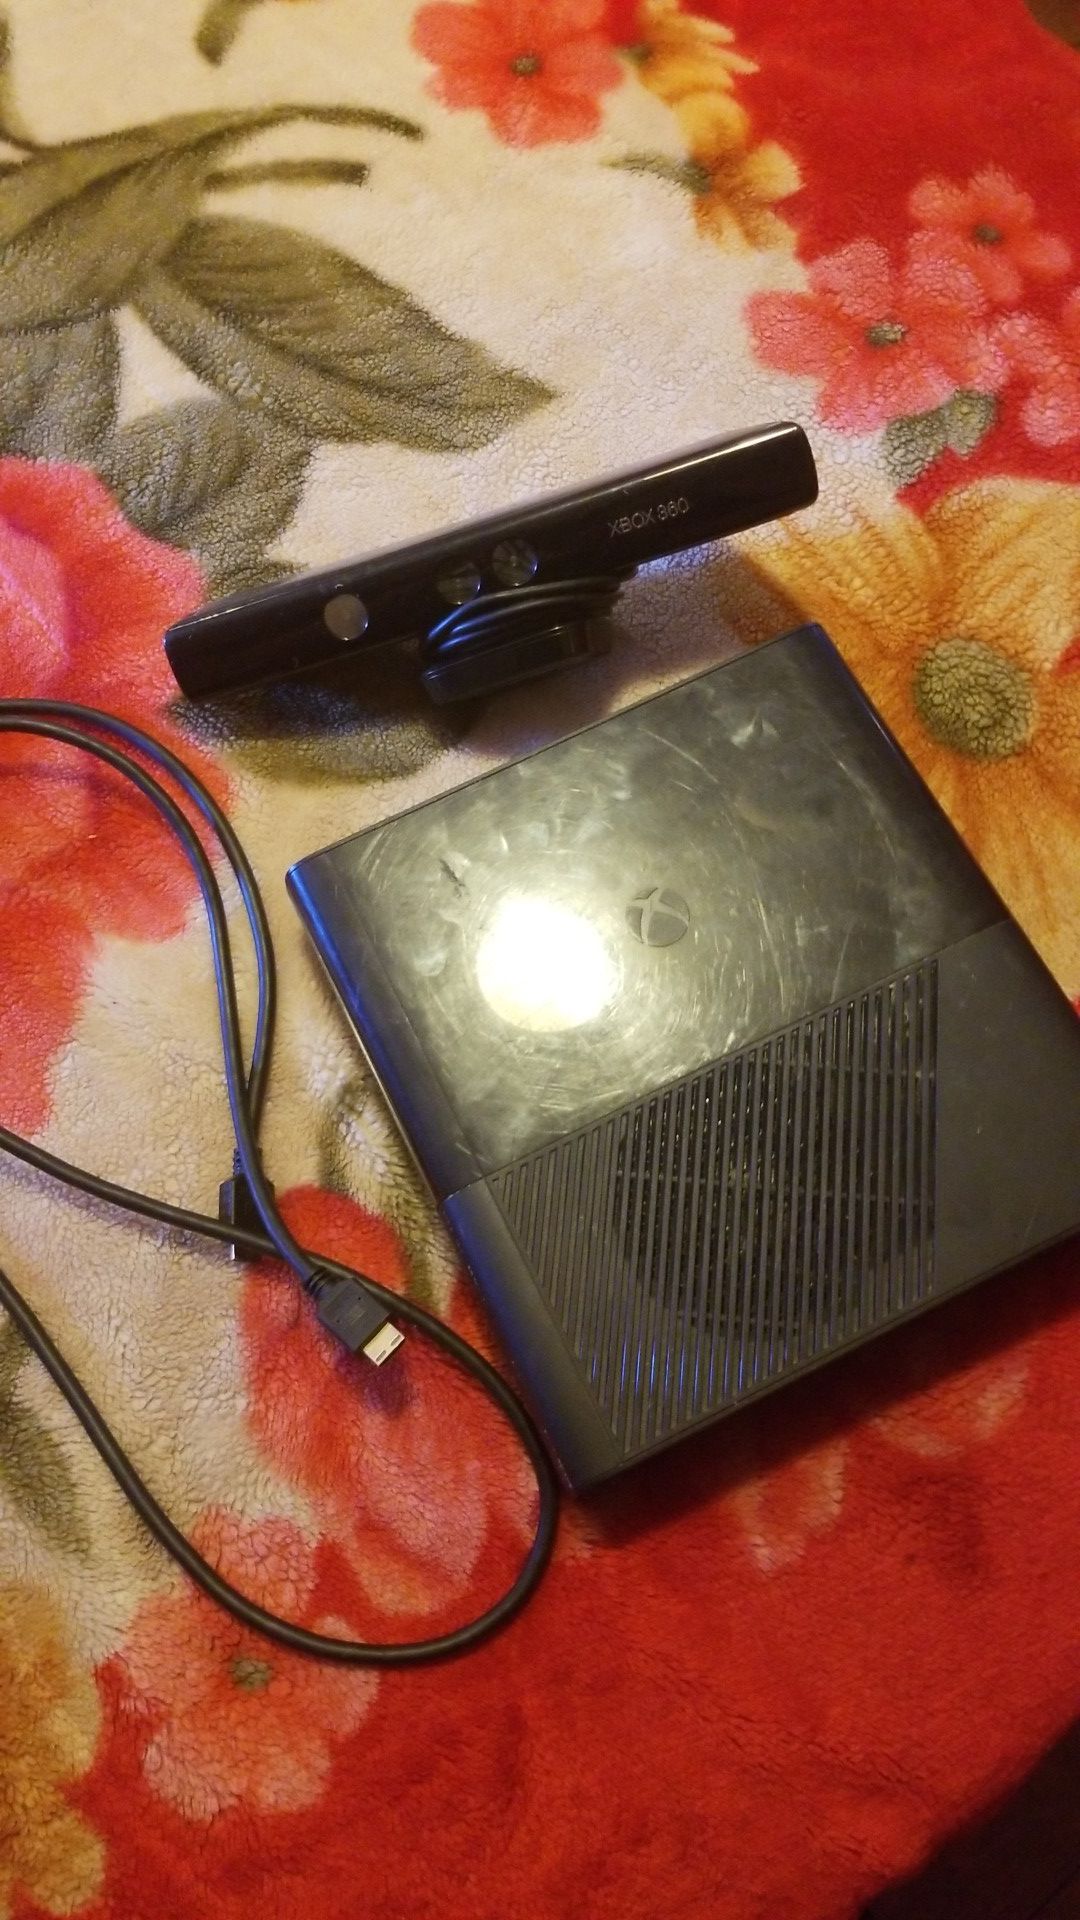 Xbox360 and connect camera and hdmi